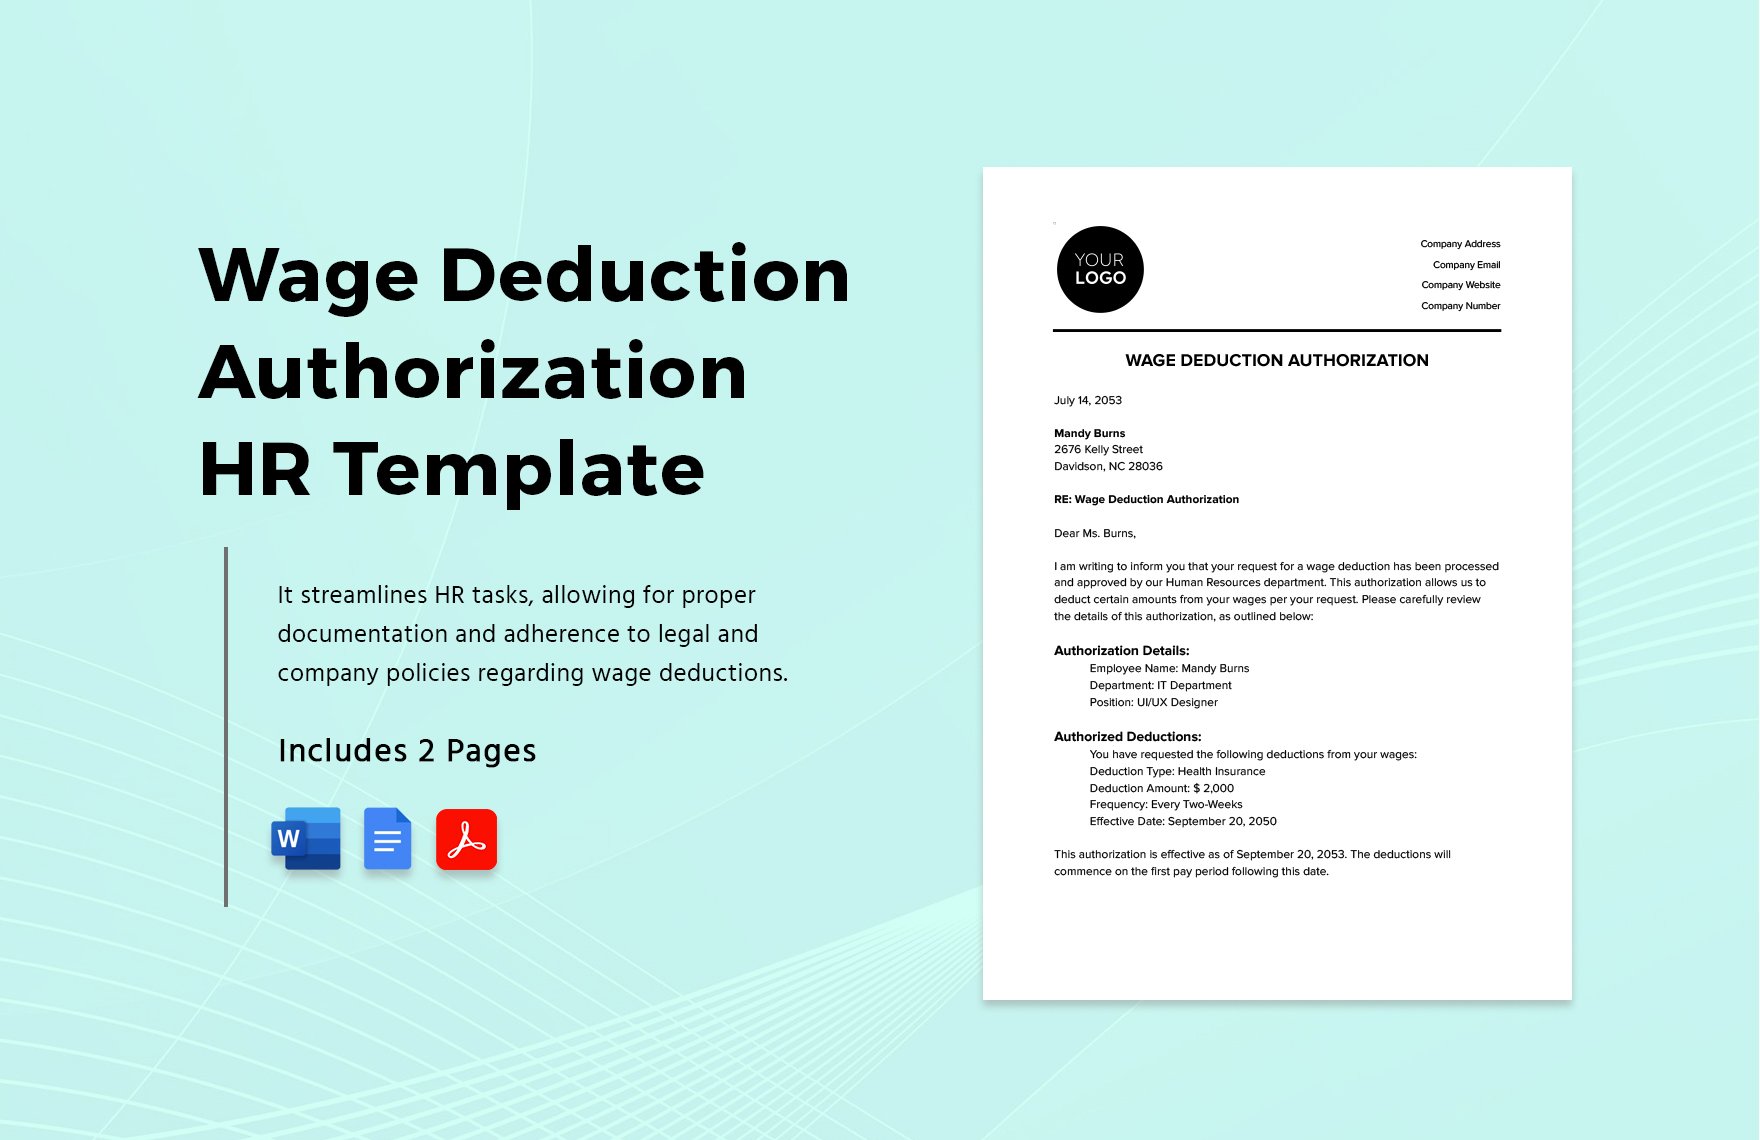 Wage Deduction Authorization HR Template